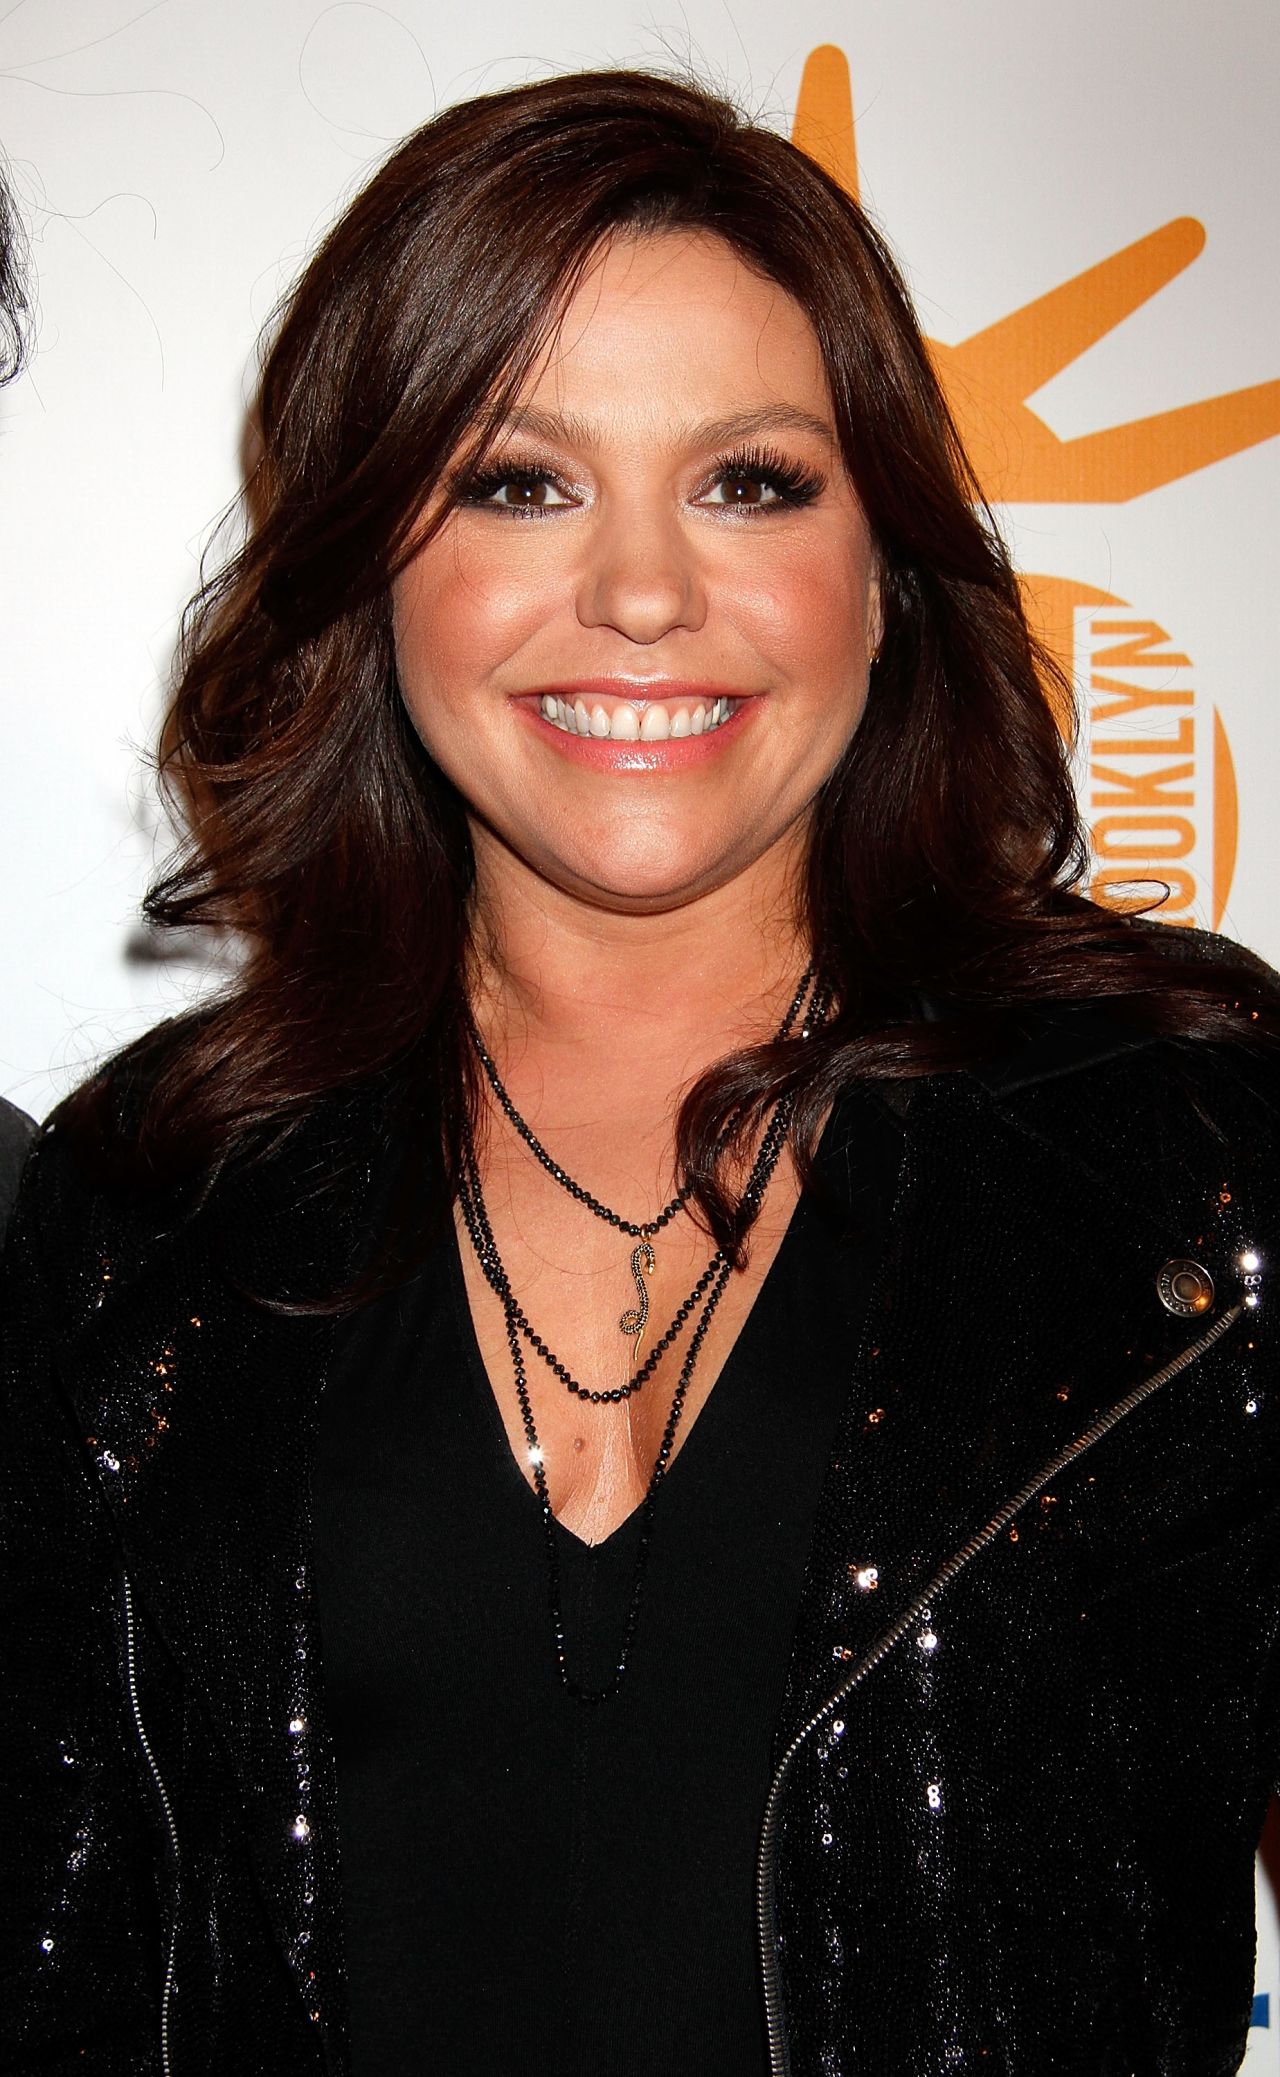 Kitchen maven Rachael Ray told <a href="http://celebritybabies.people.com/2007/05/15/rachael_ray_def/" target="_blank" target="_blank">People magazine in 2007</a> that she and her husband had no plans to start a family. "I feel like a bad mom to my dog some days because I'm just not here enough," she said. 